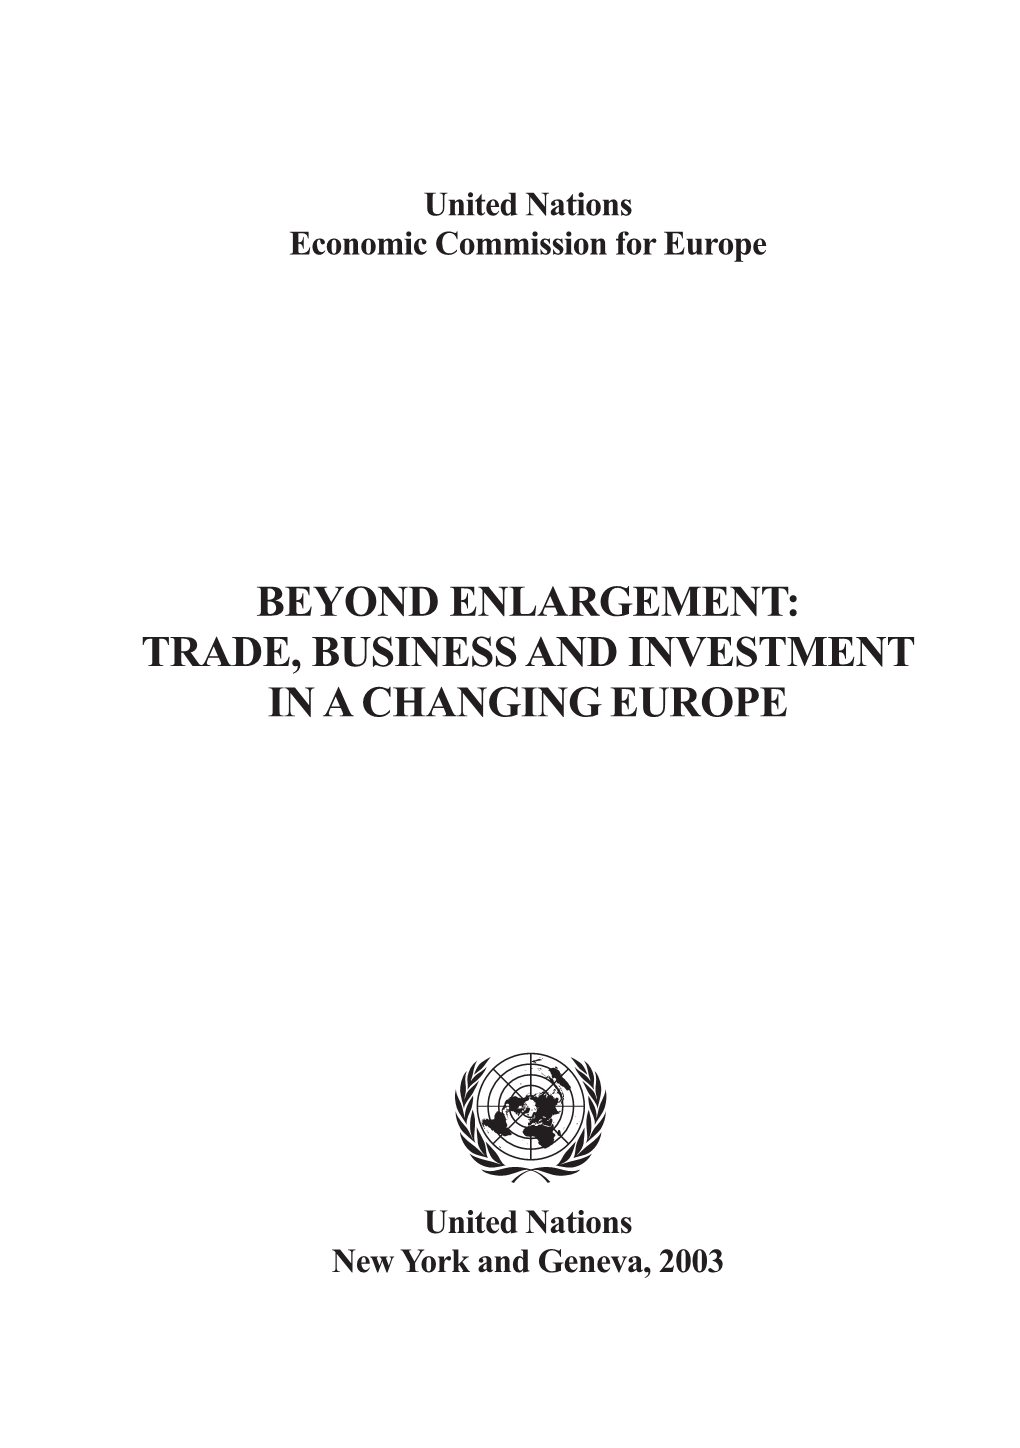 Beyond Enlargement: Trade, Business and Investment in a Changing Europe